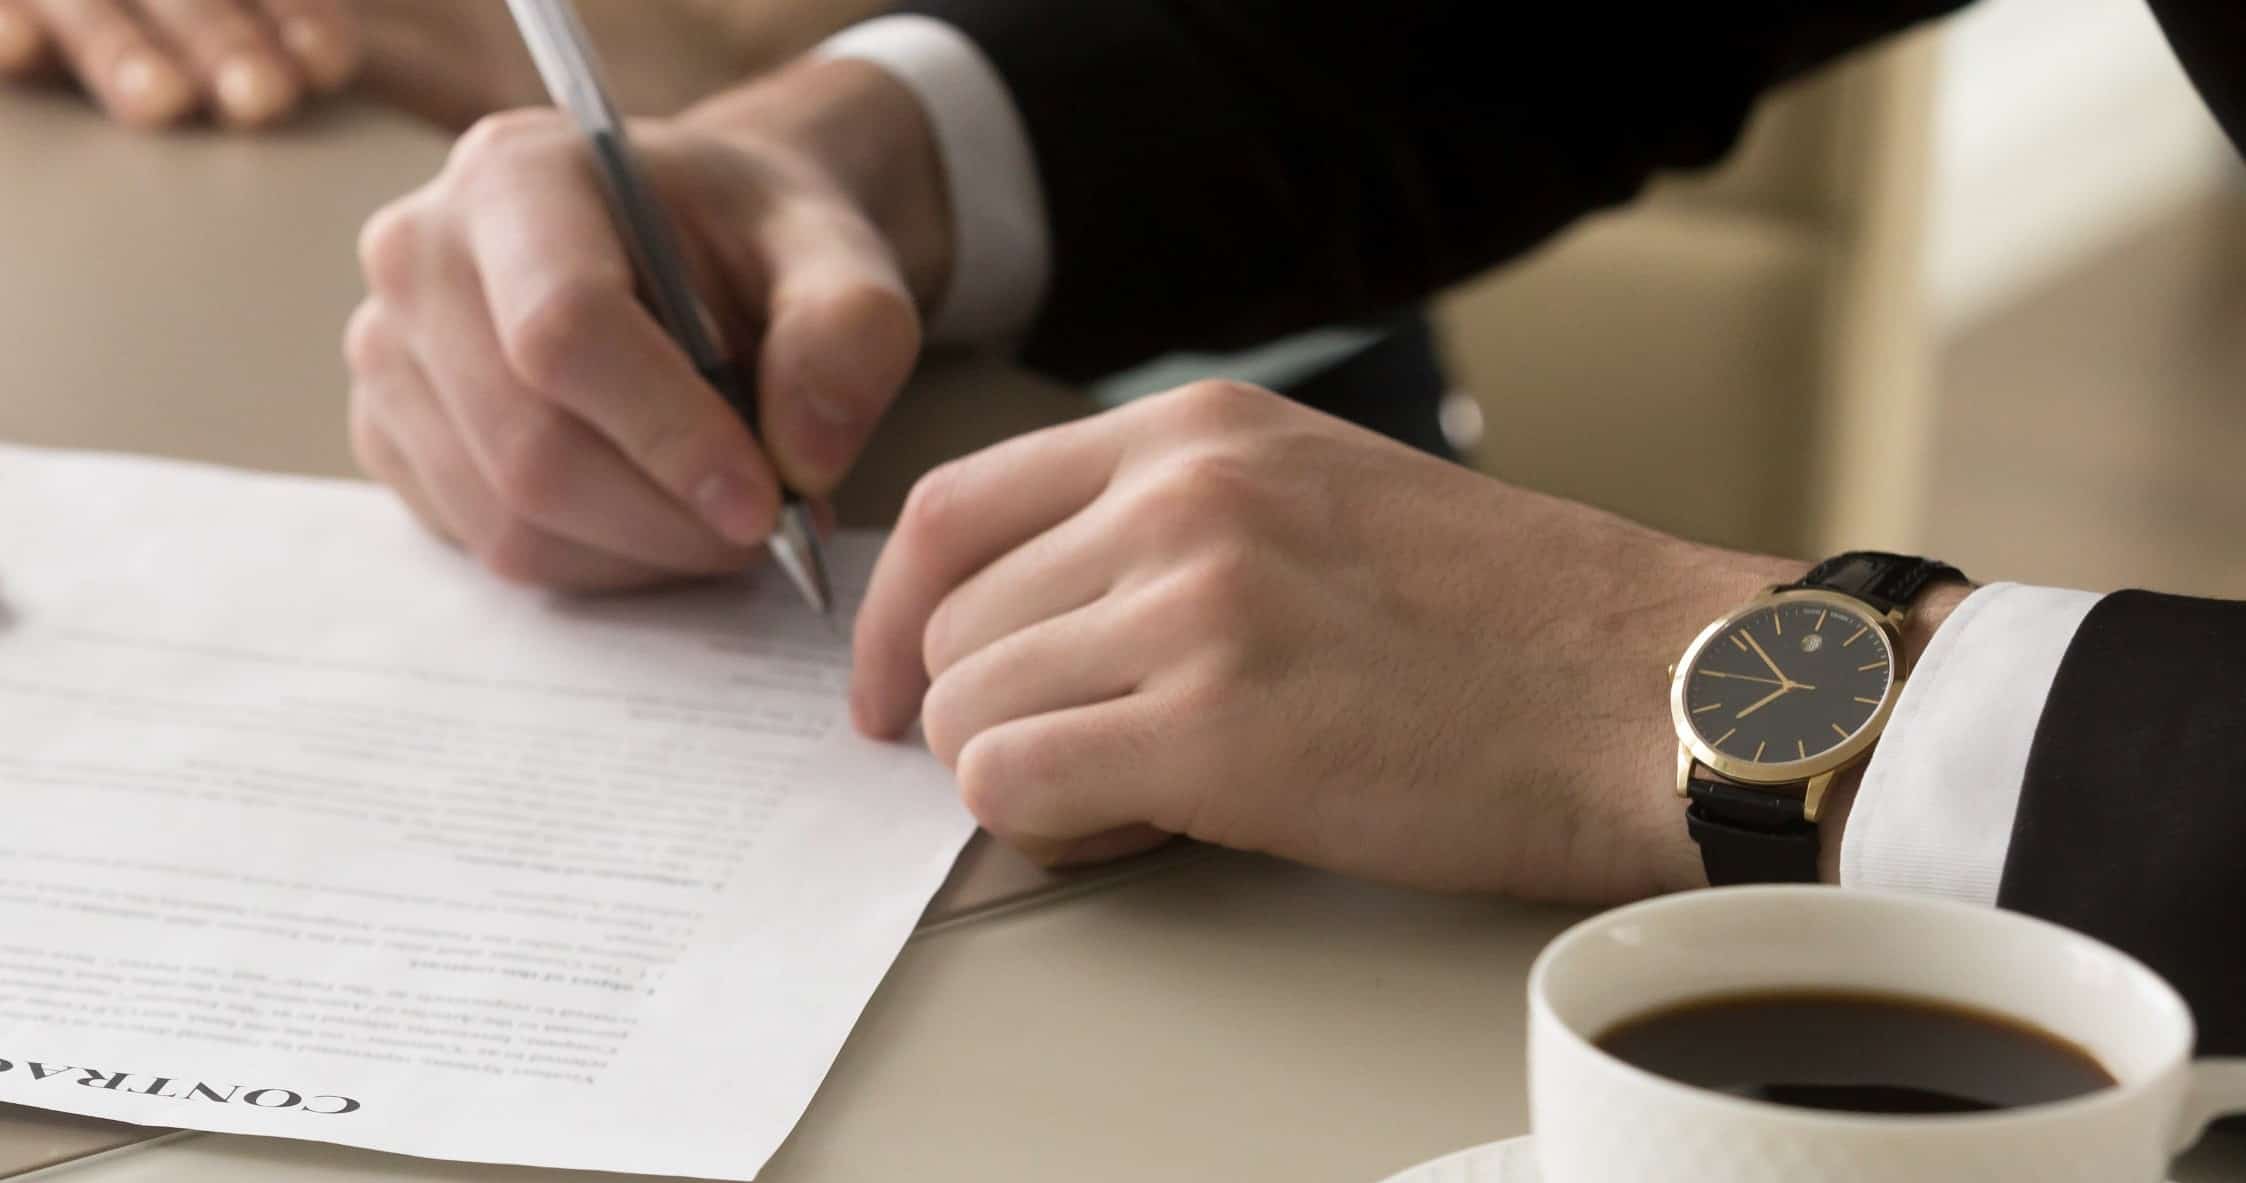 Man's hand holding pen, signing contract document